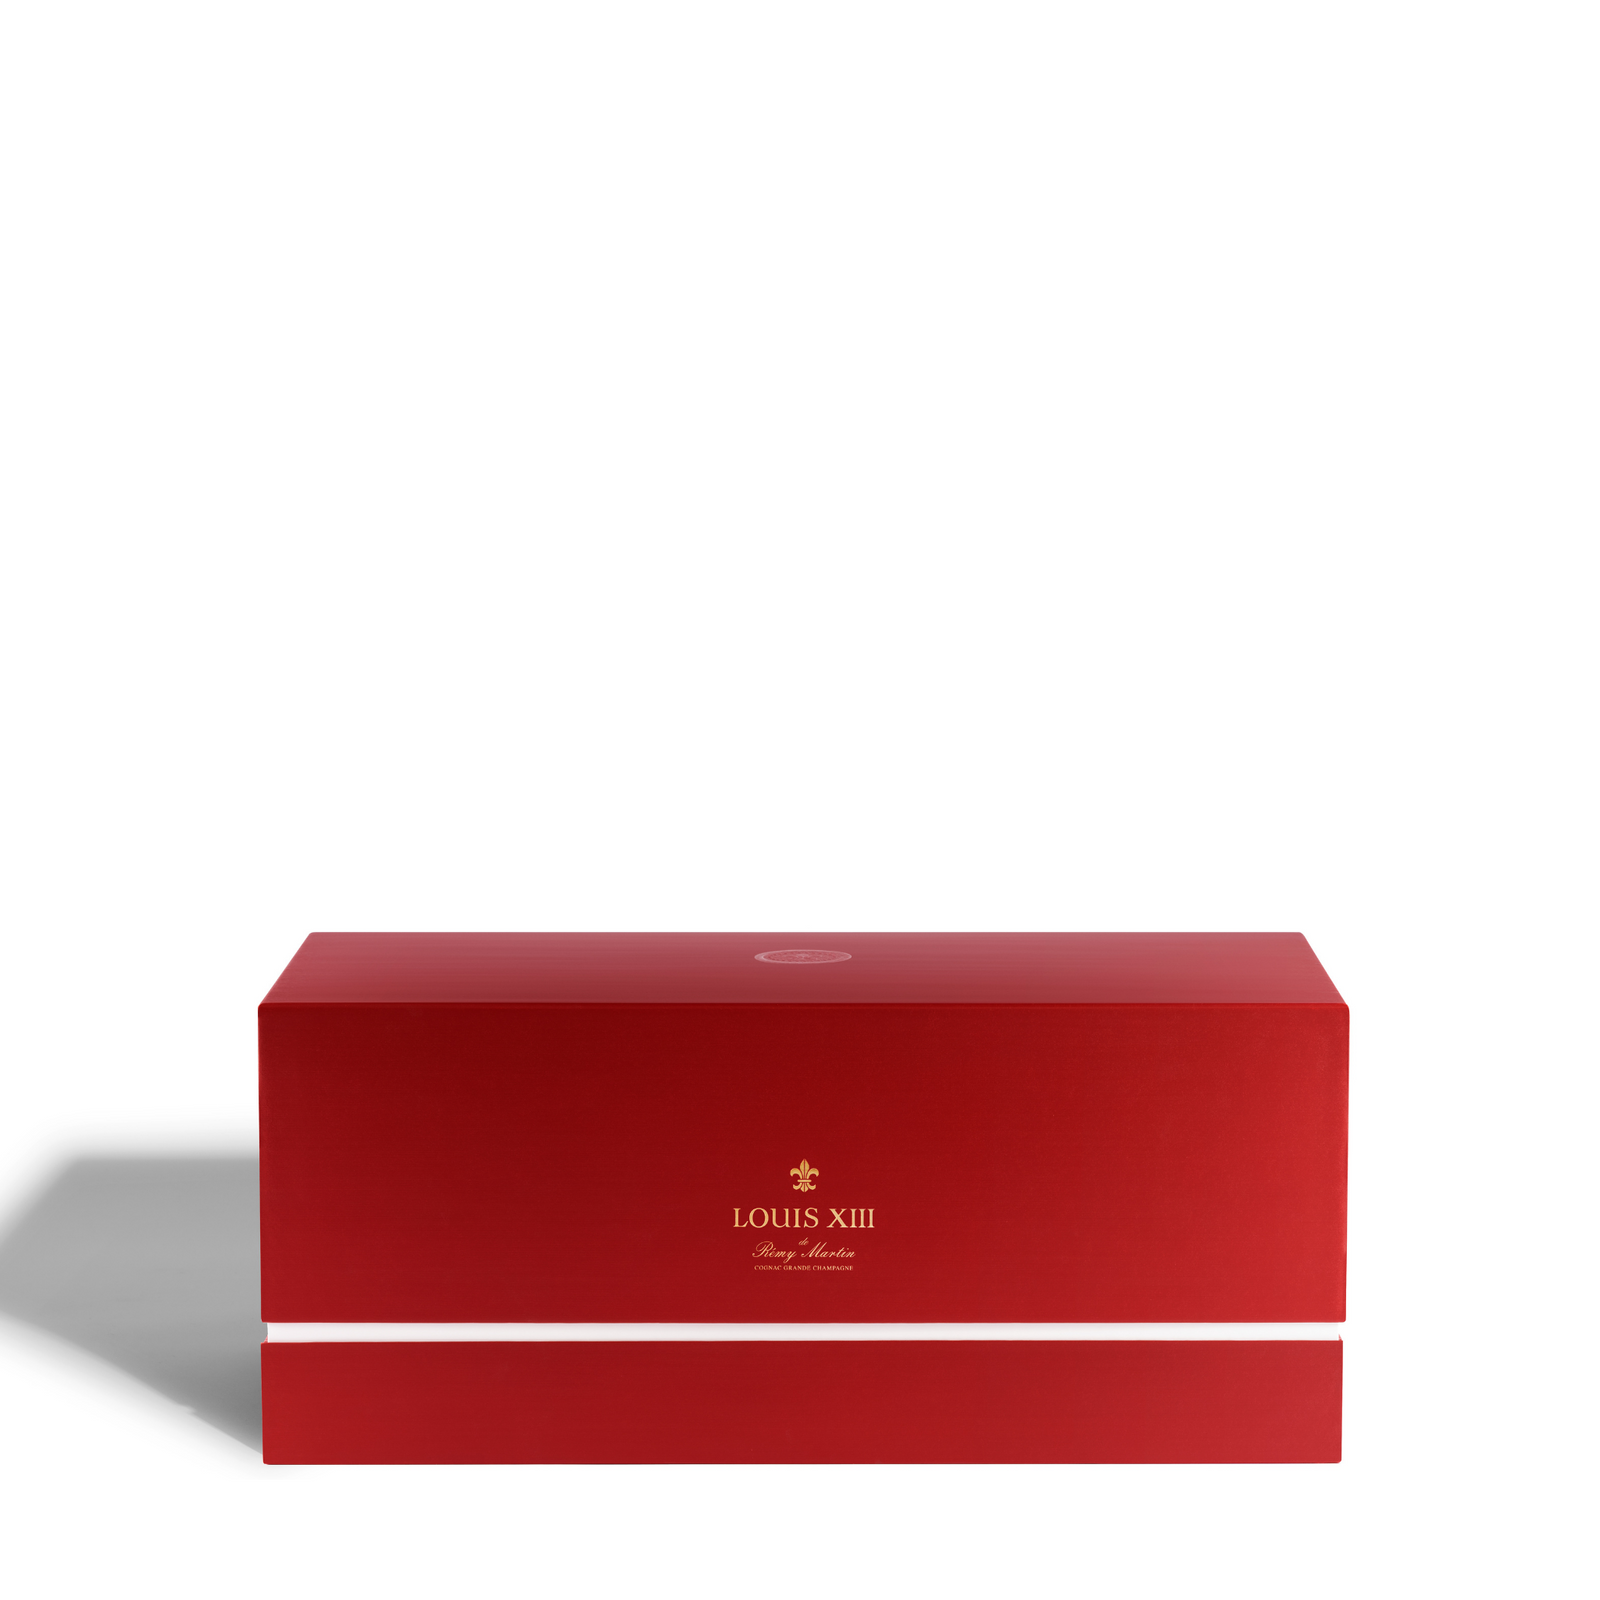 A packshot of the packaging of the LOUIS XIII bellota set